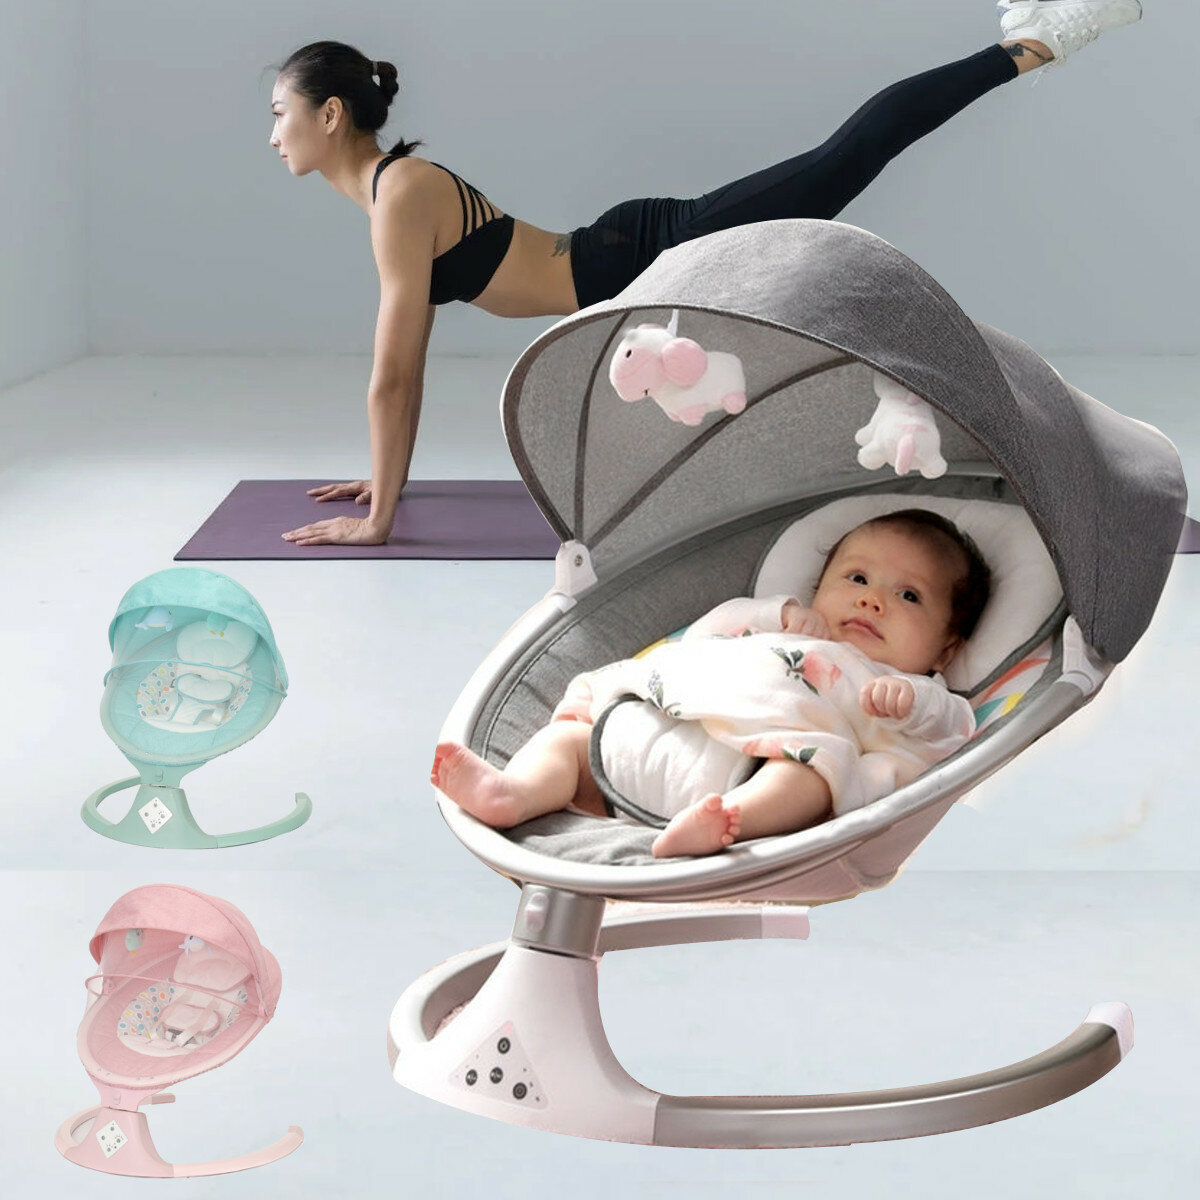 

Bioby Baby Swing Bouncer Chair, Multi-function Music Electric Swing Activities Rocker Shaker Recliner Comfort Autoswing